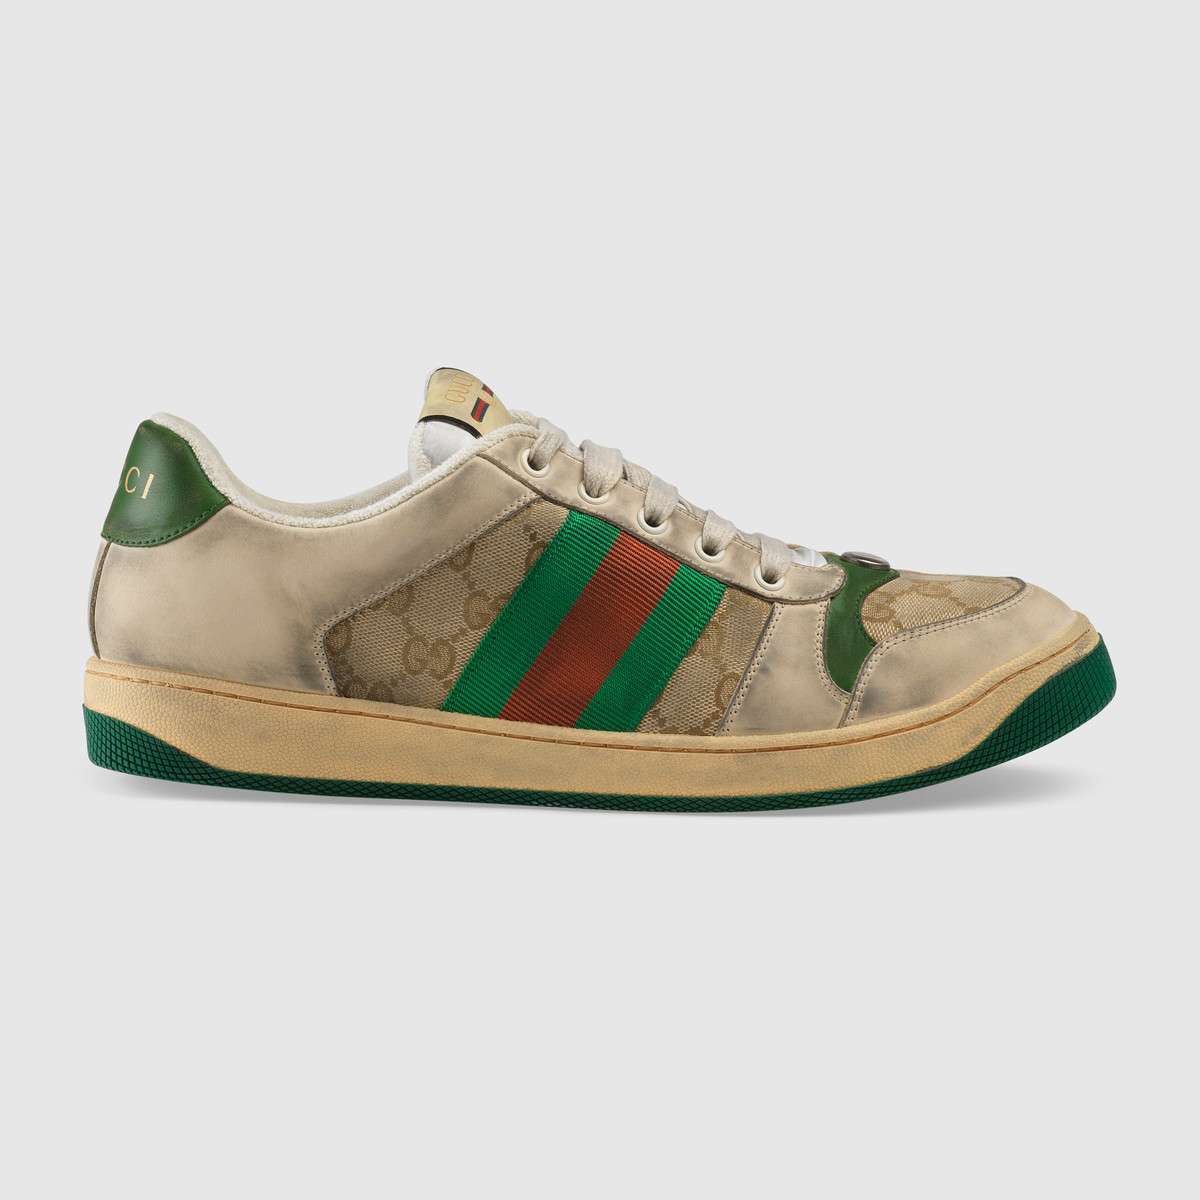 Gucci Leather Lace-up Shoe With Web in White for Men - Lyst